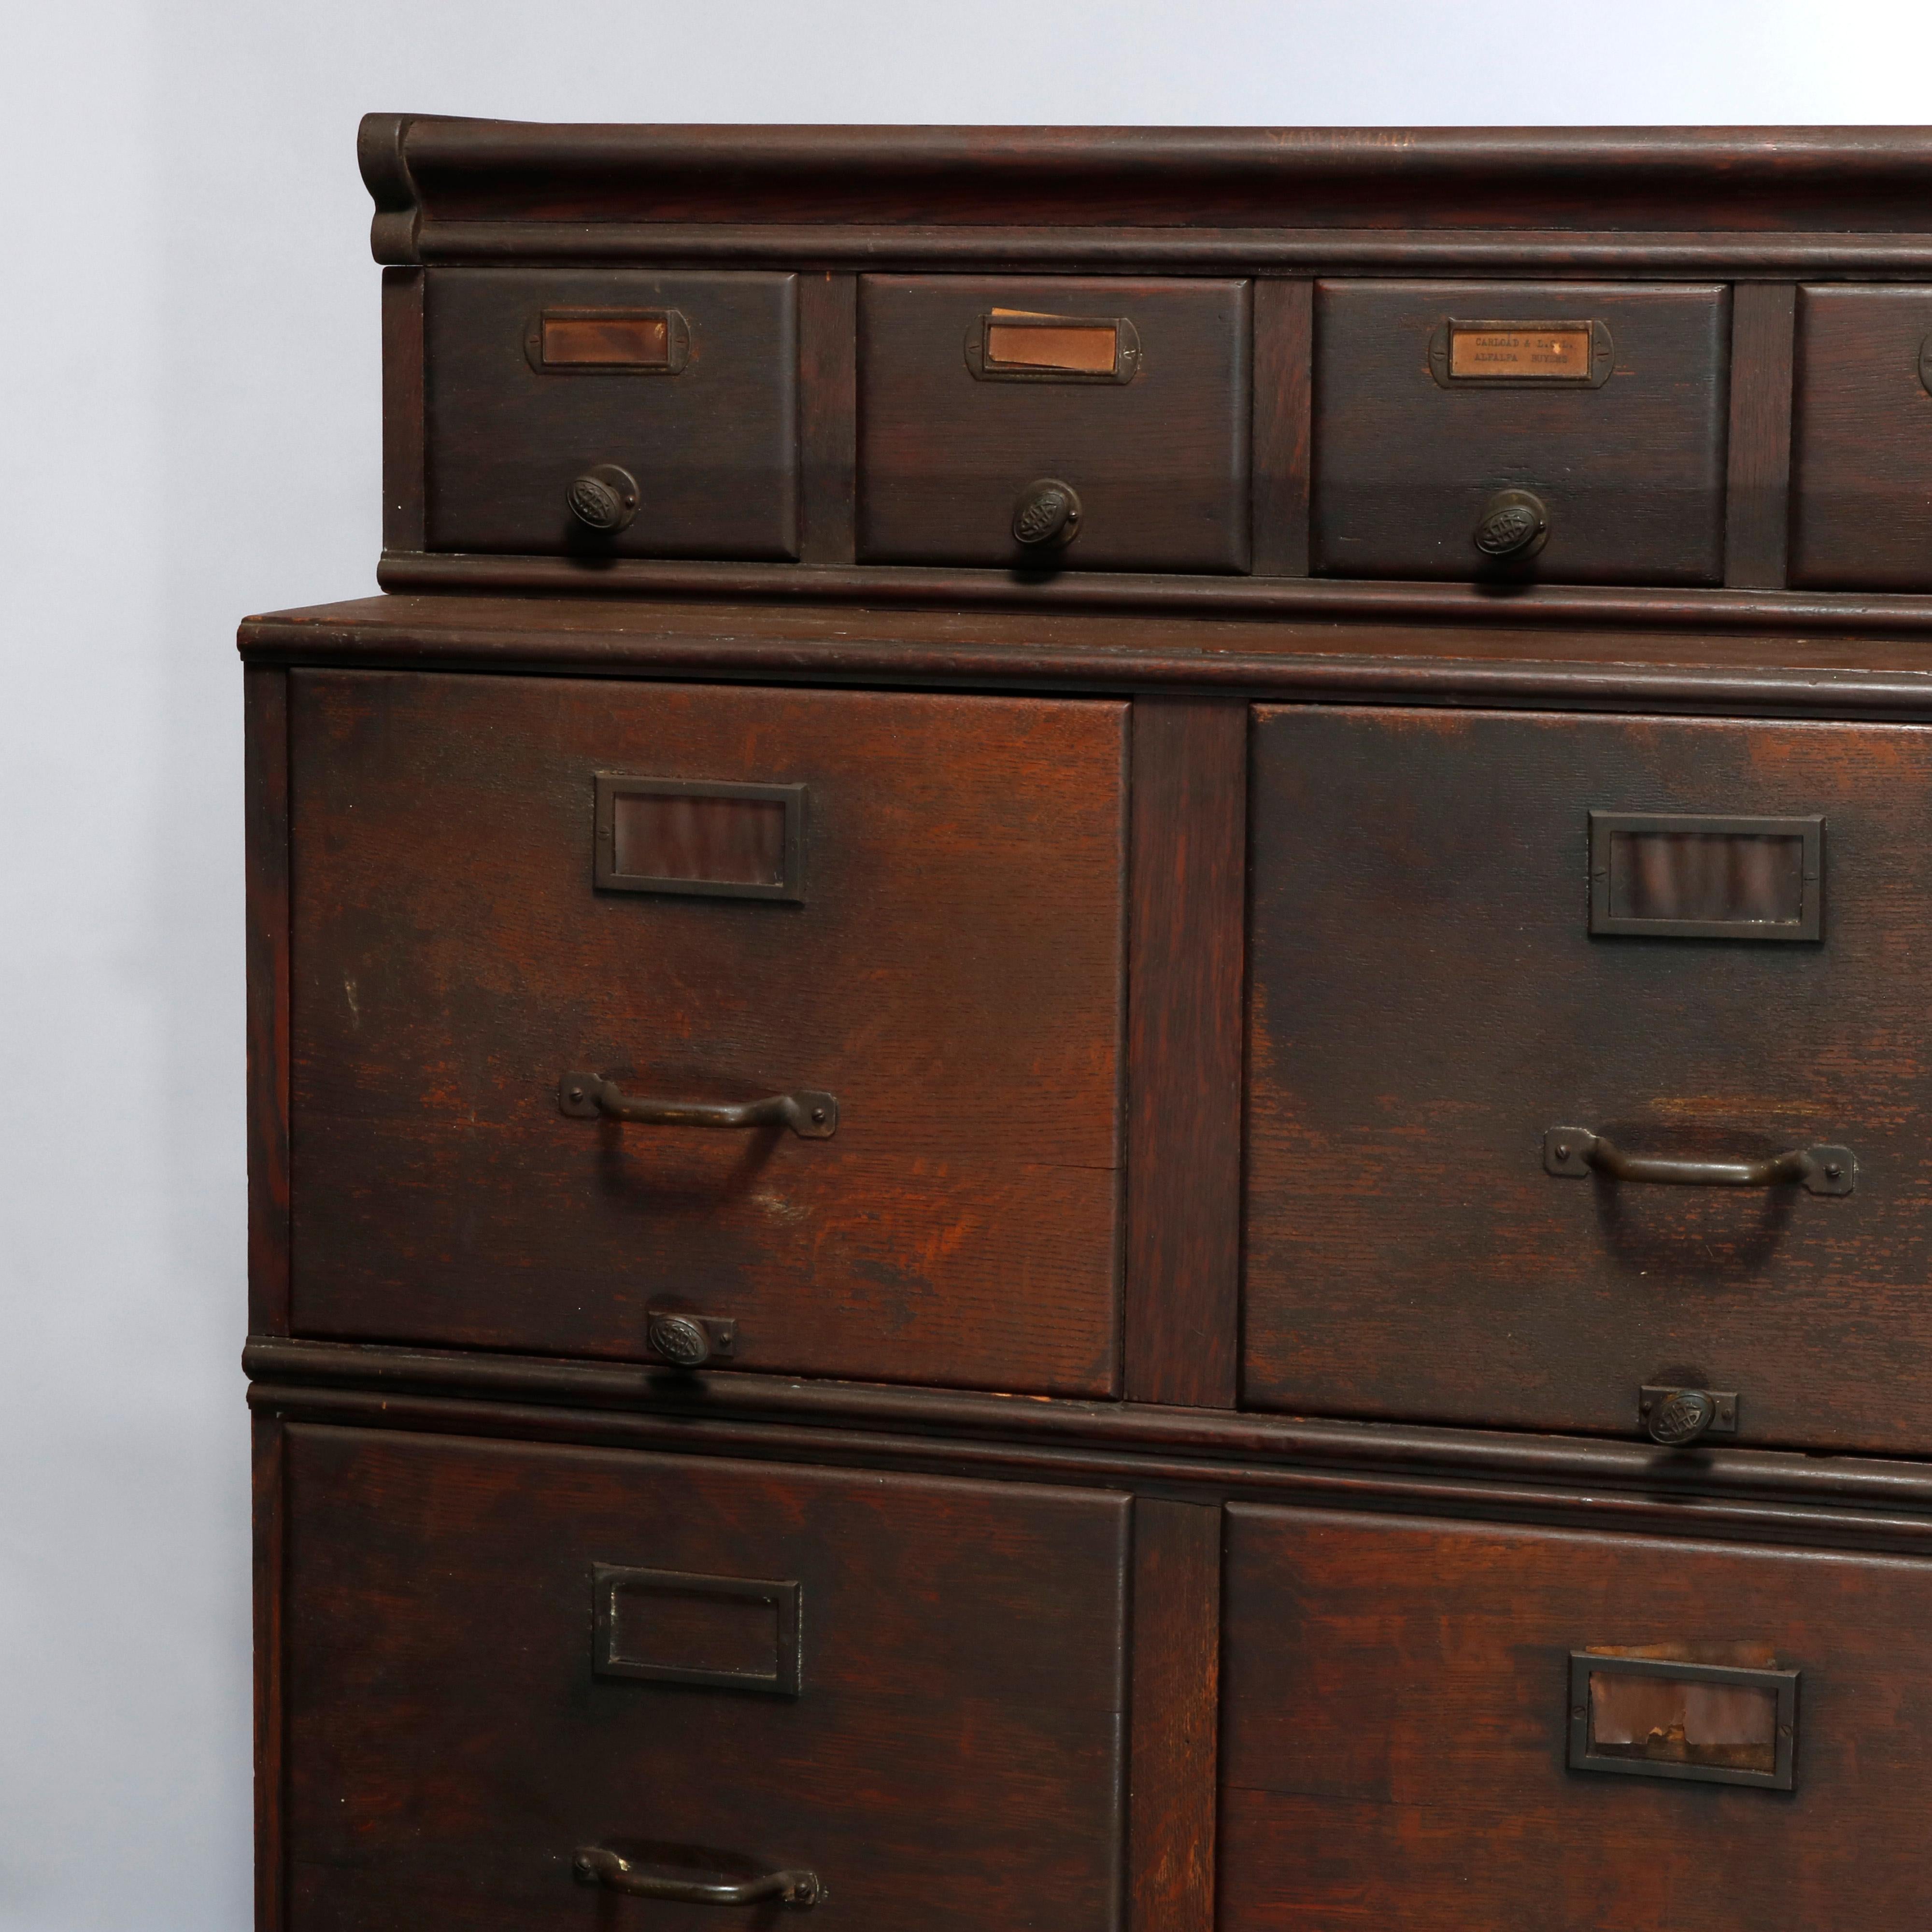 An antique Arts & Crafts fining cabinet offers oak construction with three stacks having upper with card catalog drawers and lower with standard filing drawers, cast pulls with embossed SW, c1910

Measures: 36.5